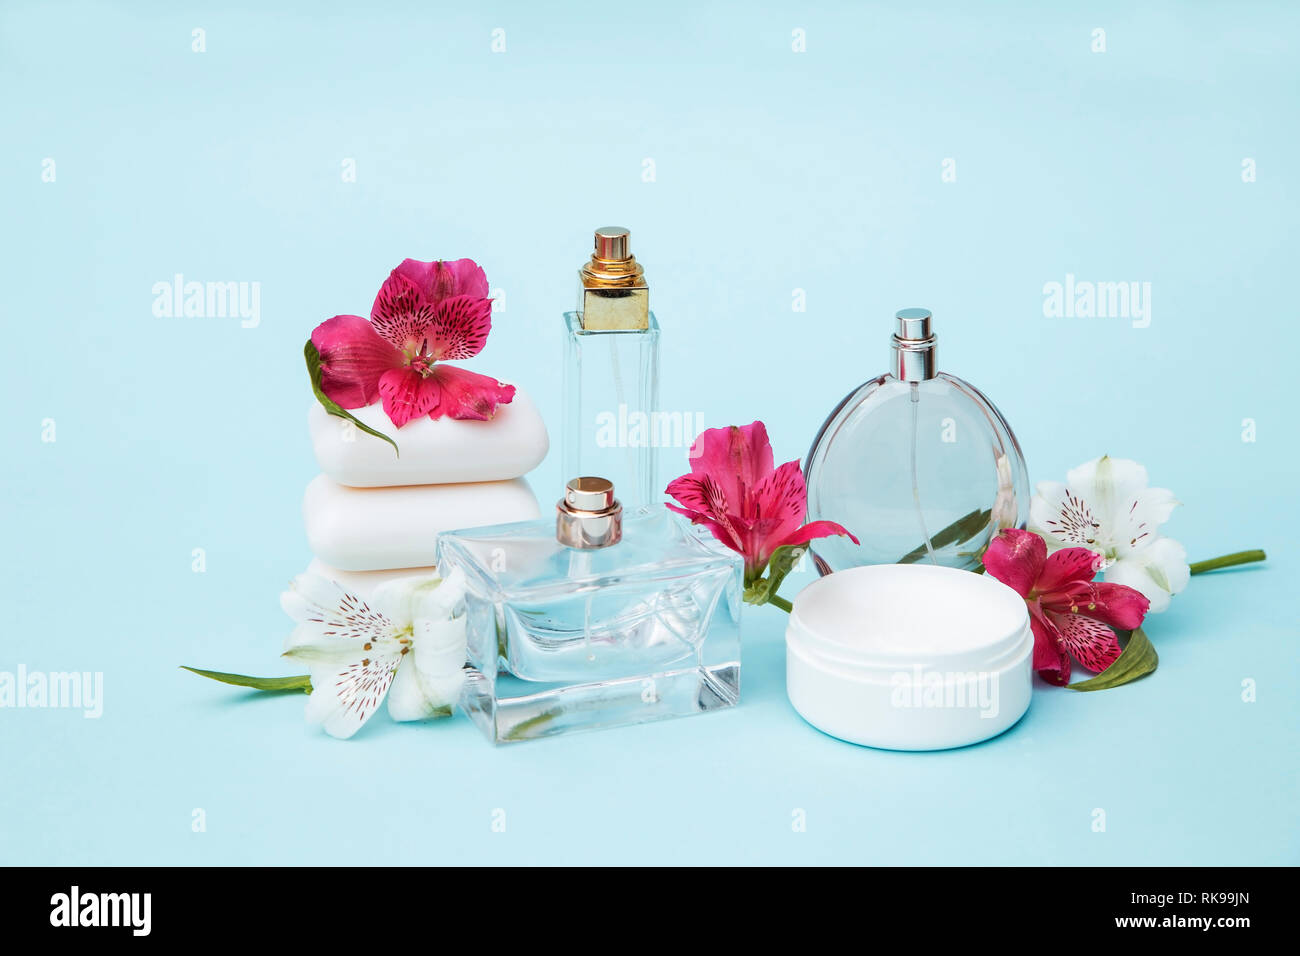 Beauty arrangement with the perfume botles and wild orchids Stock Photo